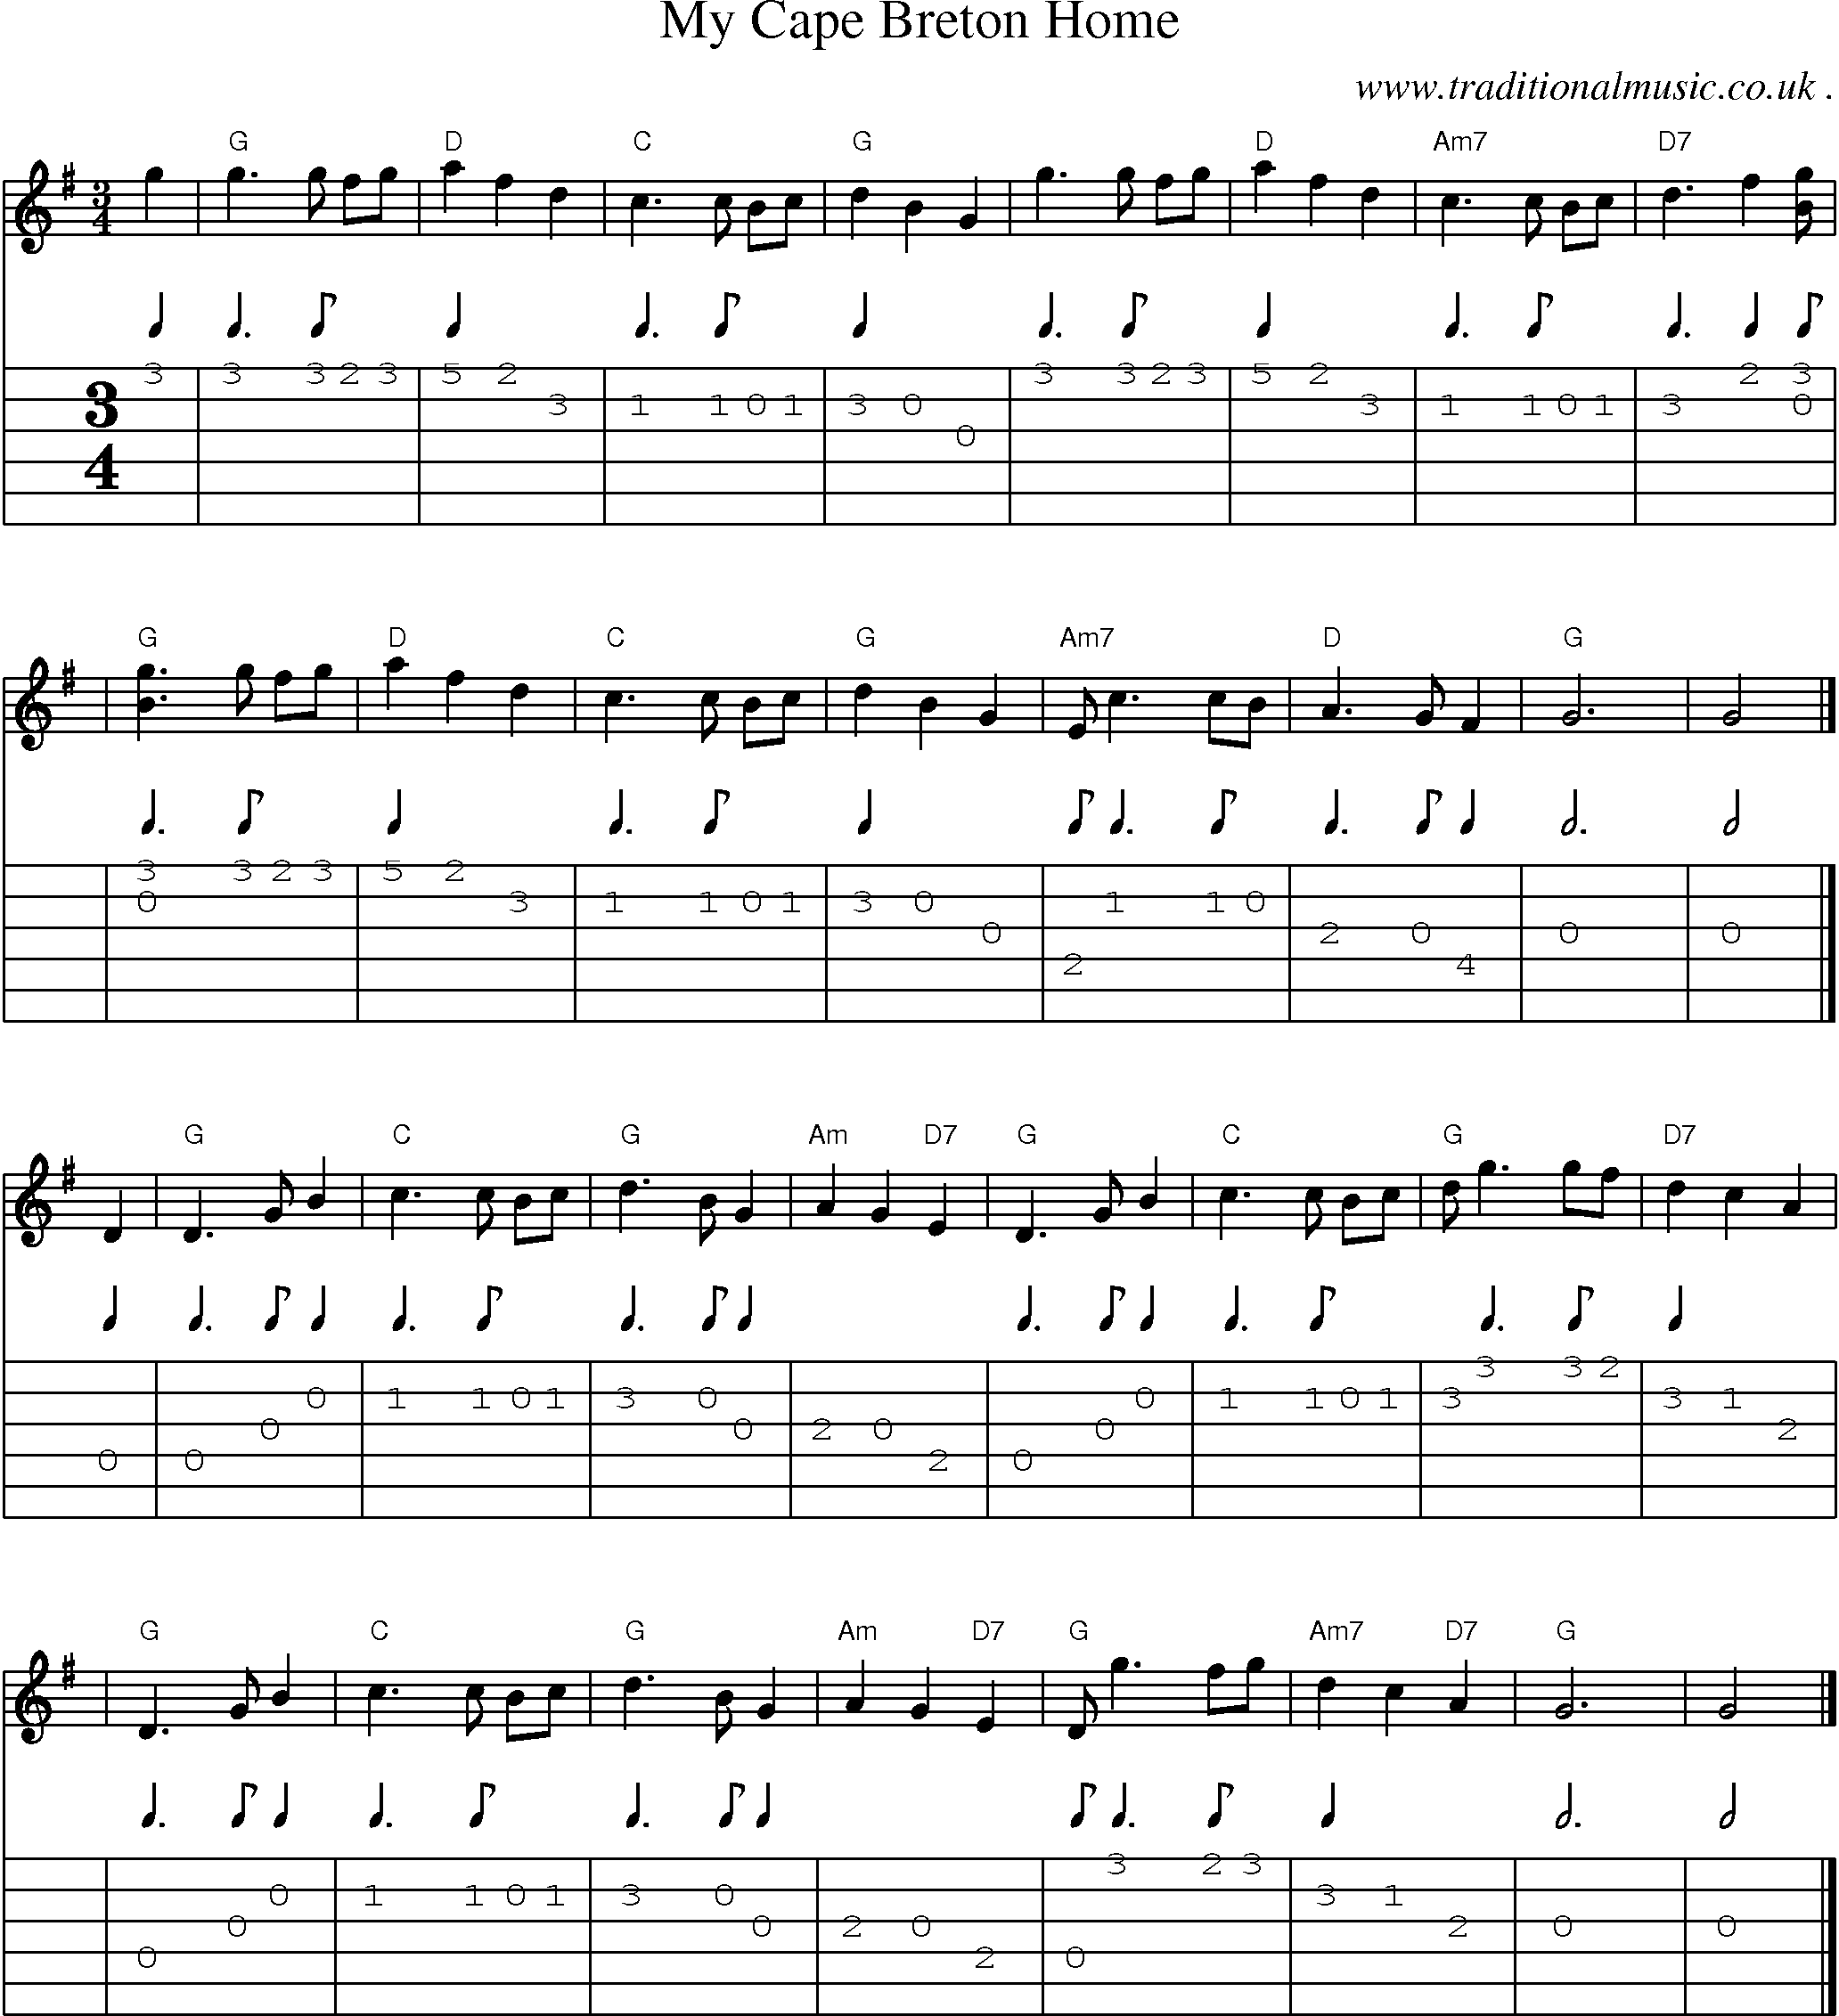 Sheet-music  score, Chords and Guitar Tabs for My Cape Breton Home